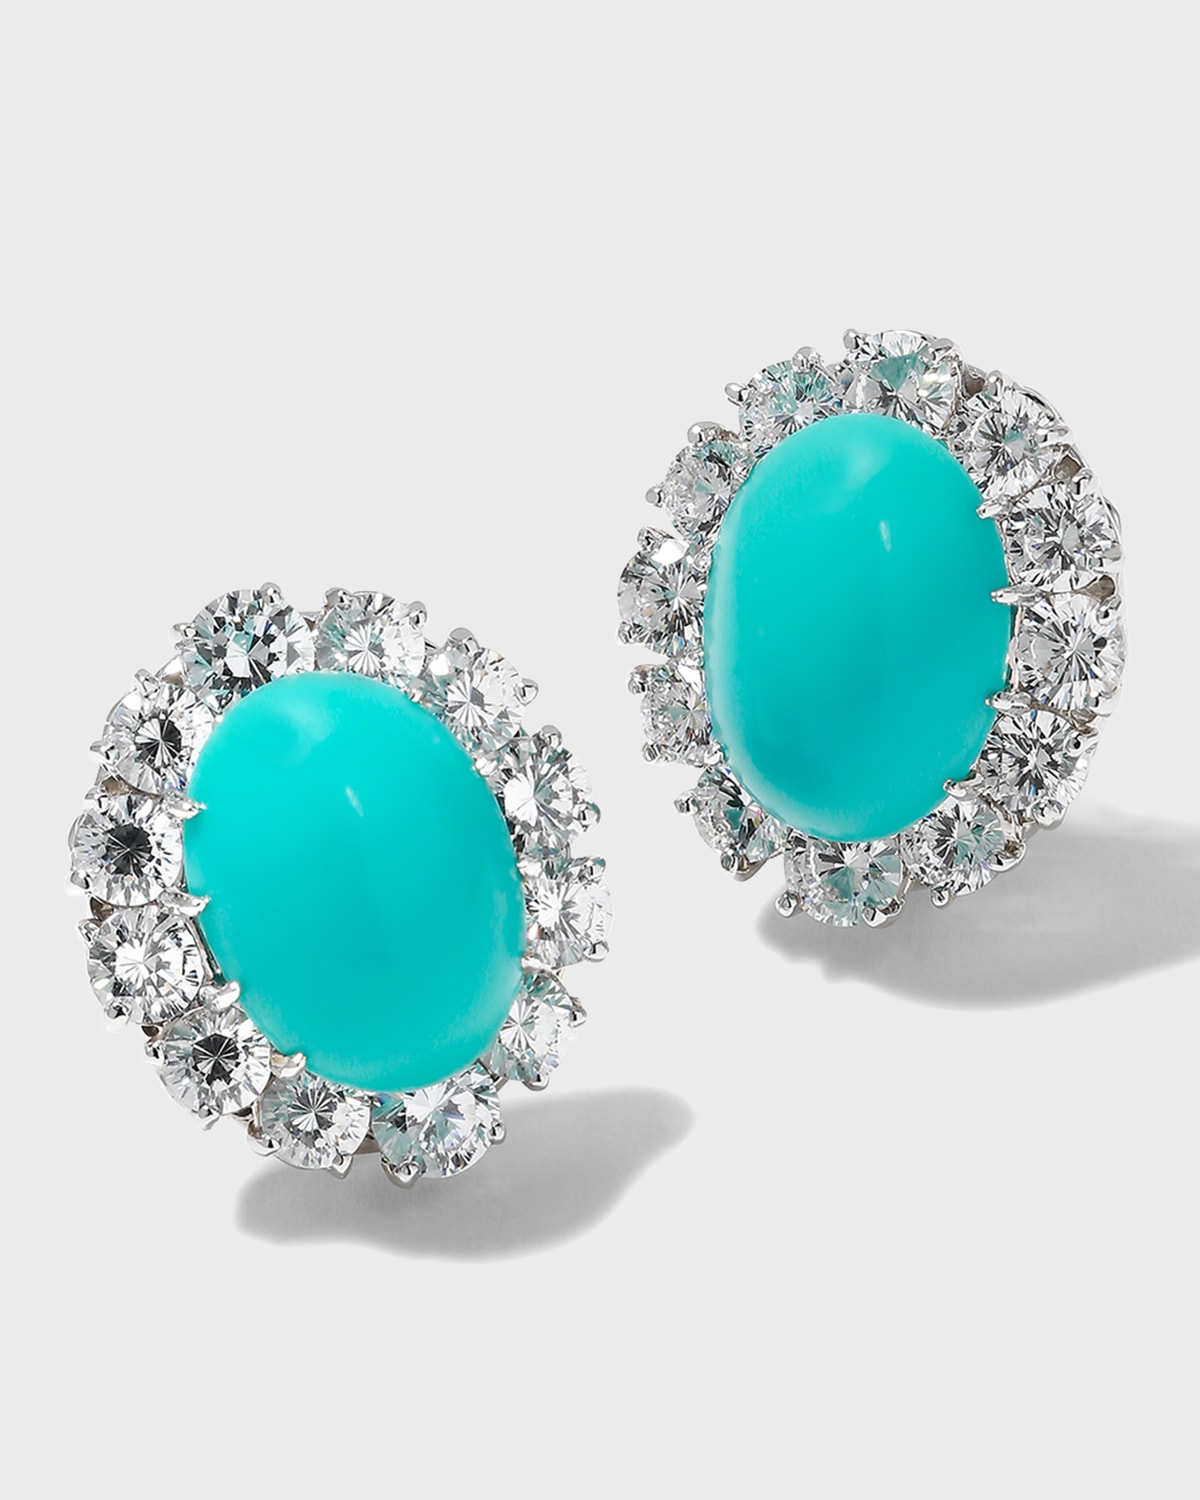 Fantasia By Deserio Cubic Zirconia Cabochon Earrings With Surrounding Rounds